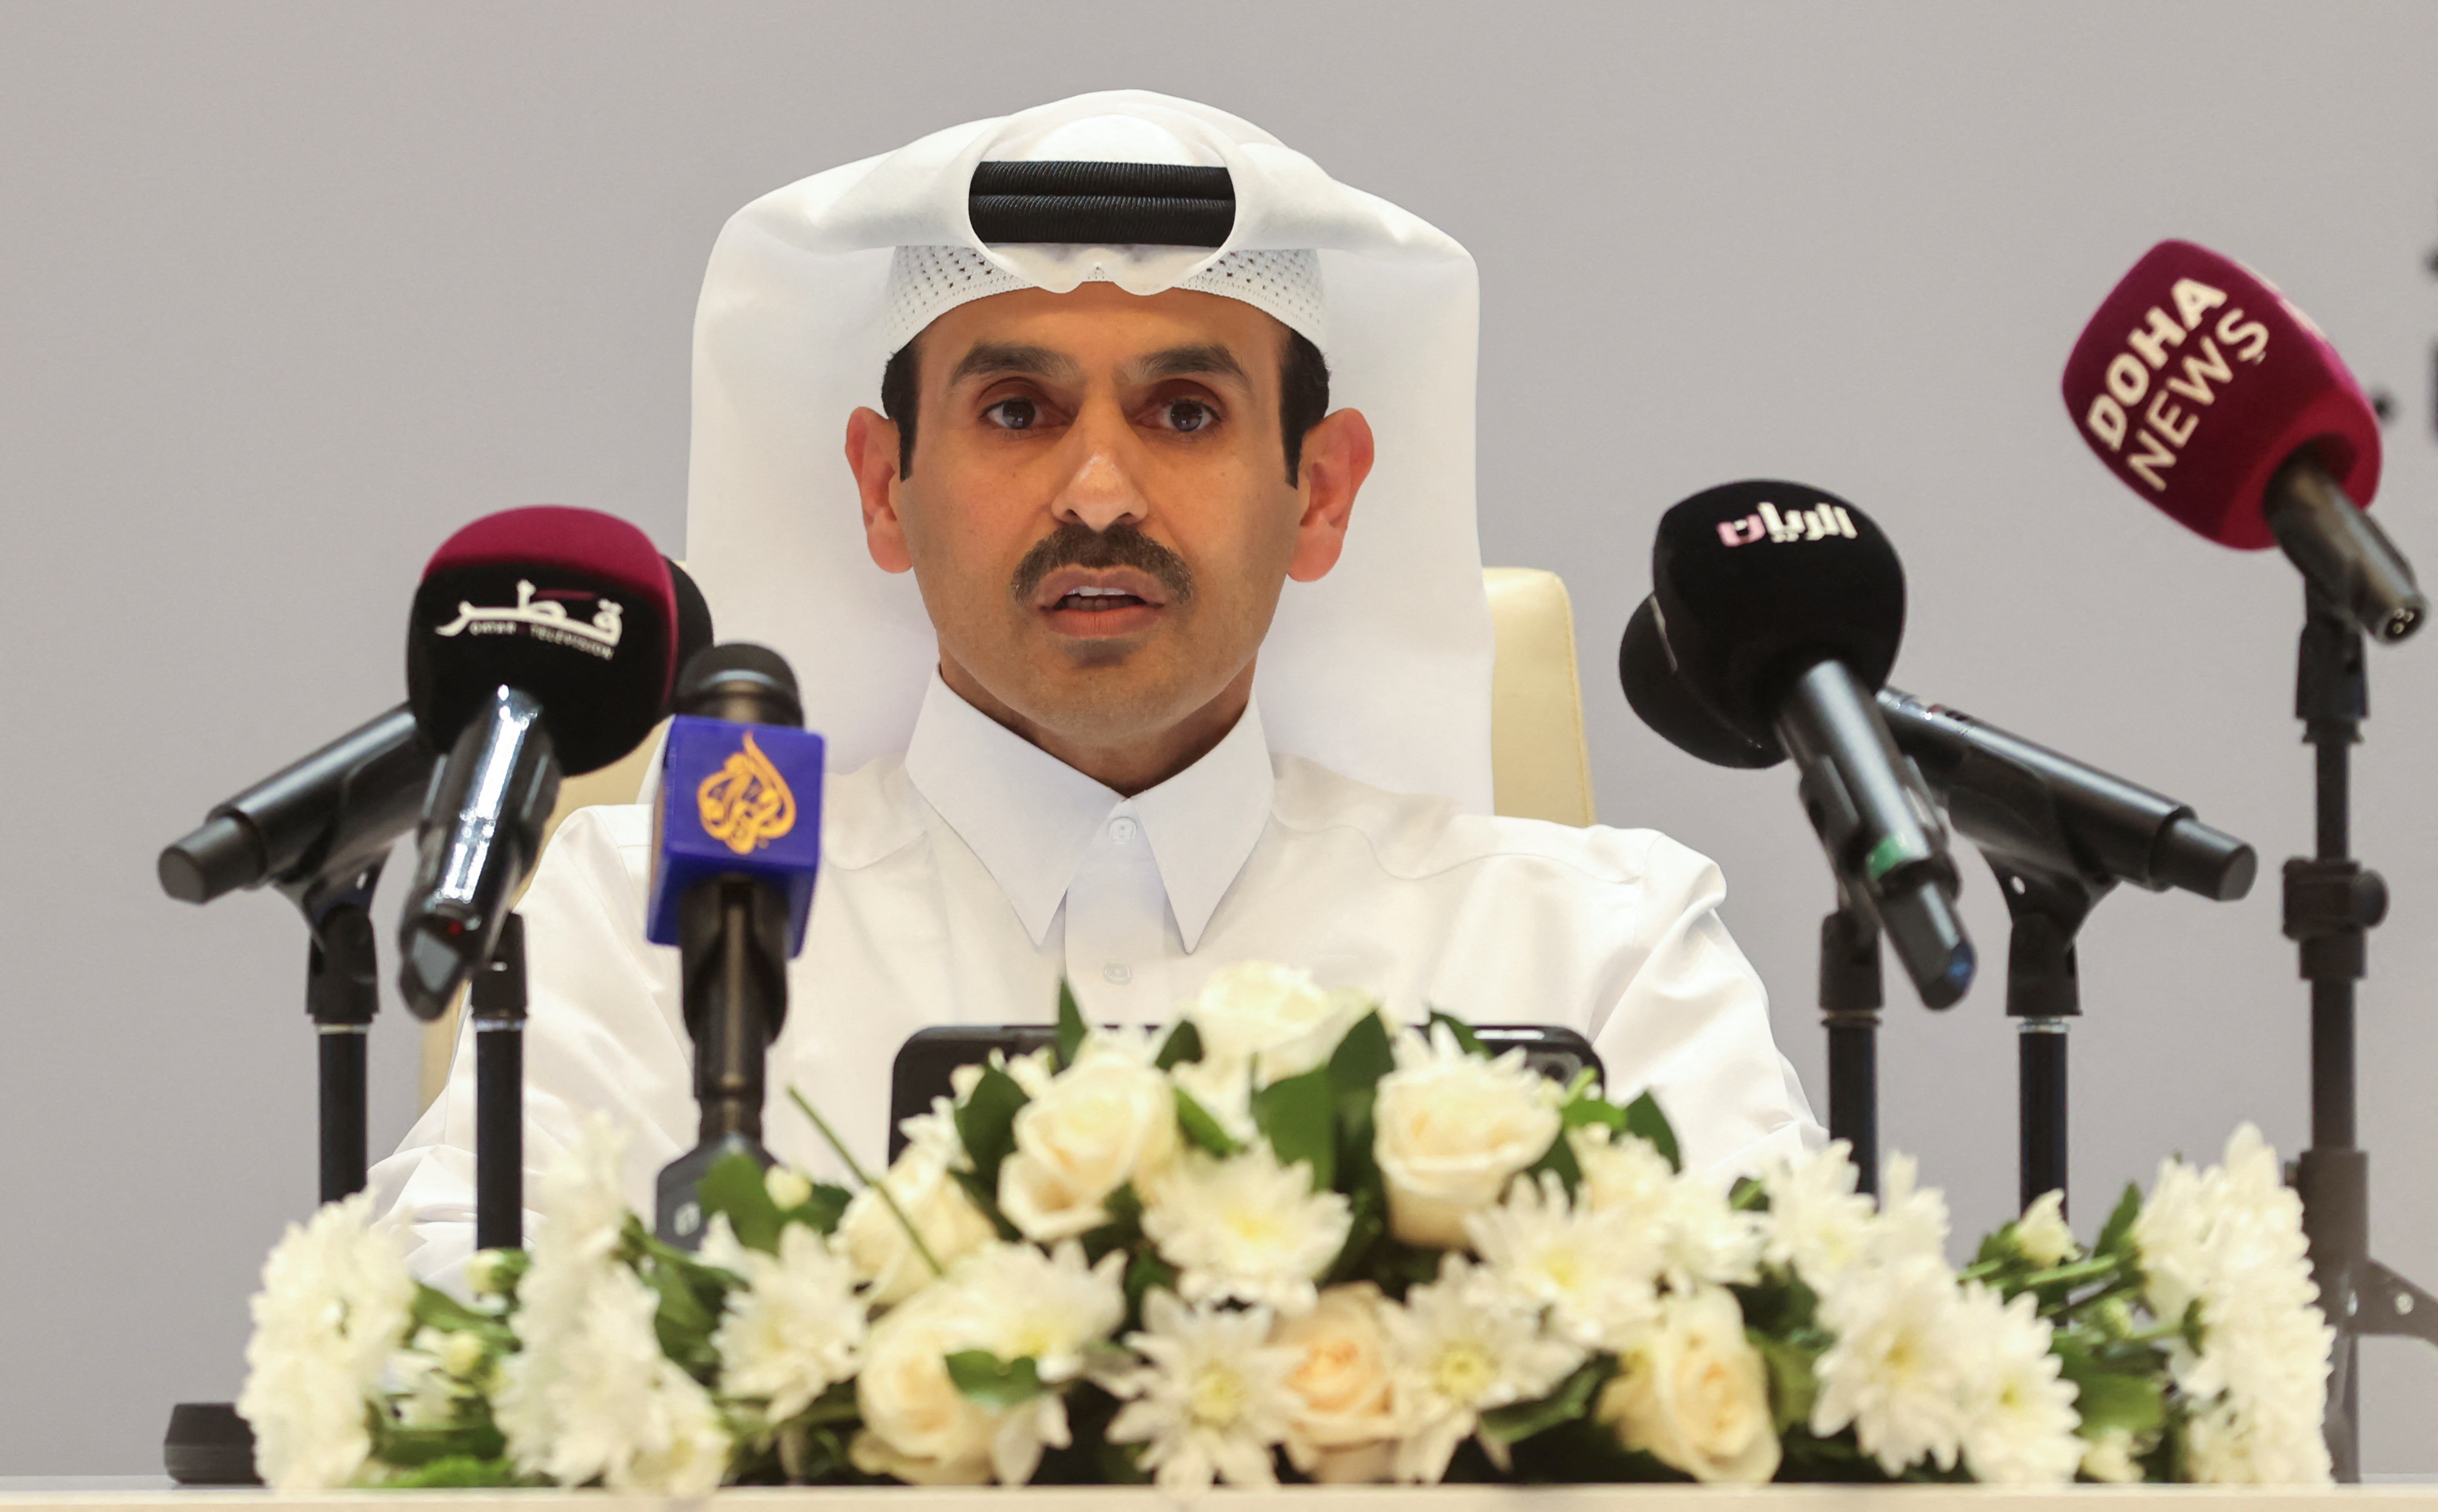 Qatar Energy CEO and Qatar's state Minister for Energy, Saad al-Kaabi speaks at an event in Doha